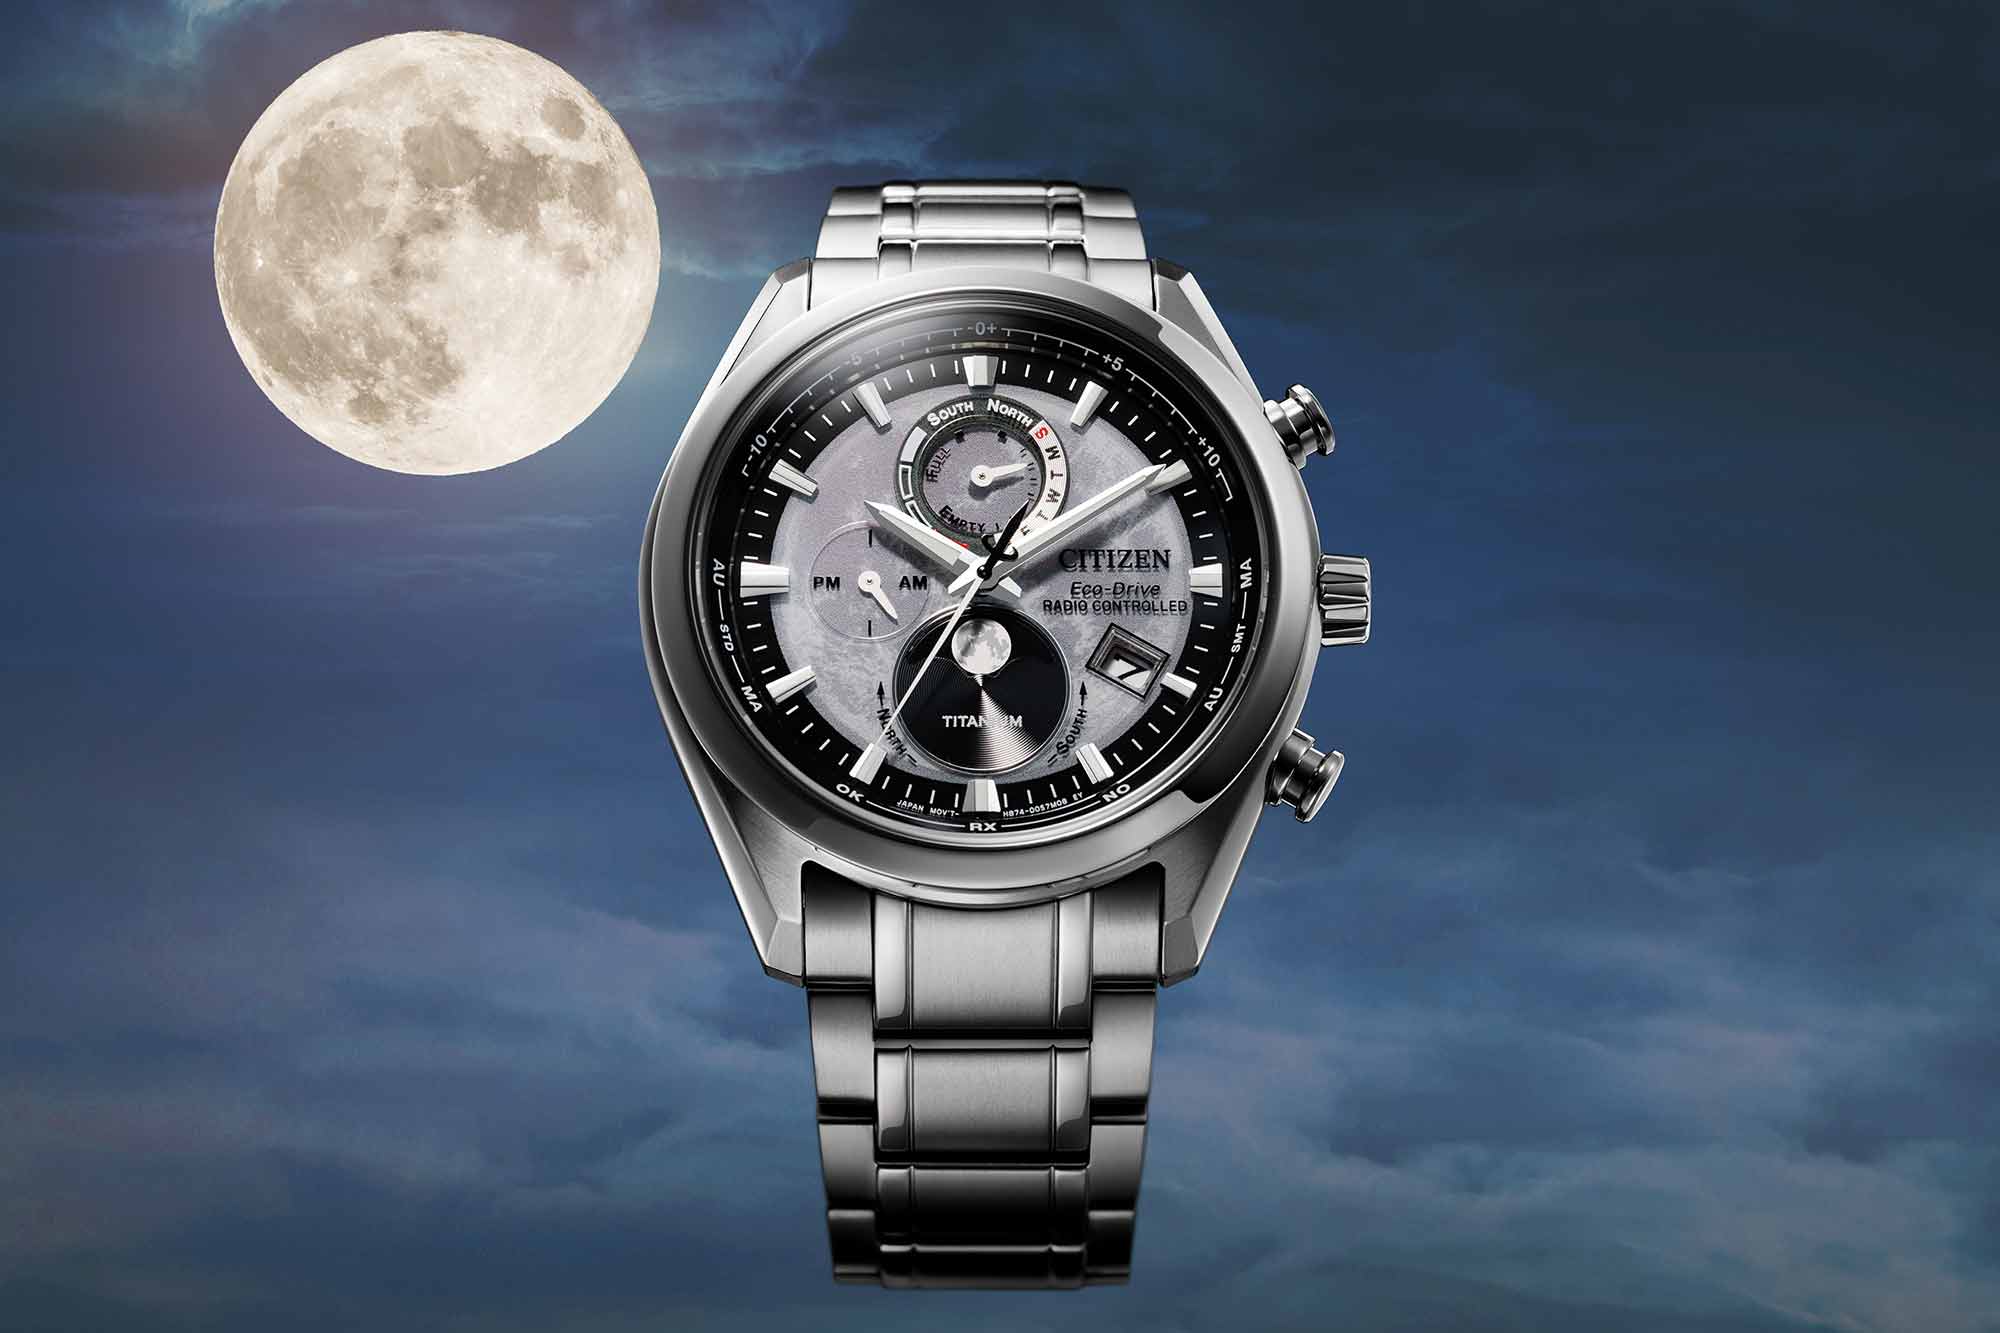 Citizen Brings an Advanced Moonphase Display to their Line of Eco-Drive Powered Atomic Timekeepers